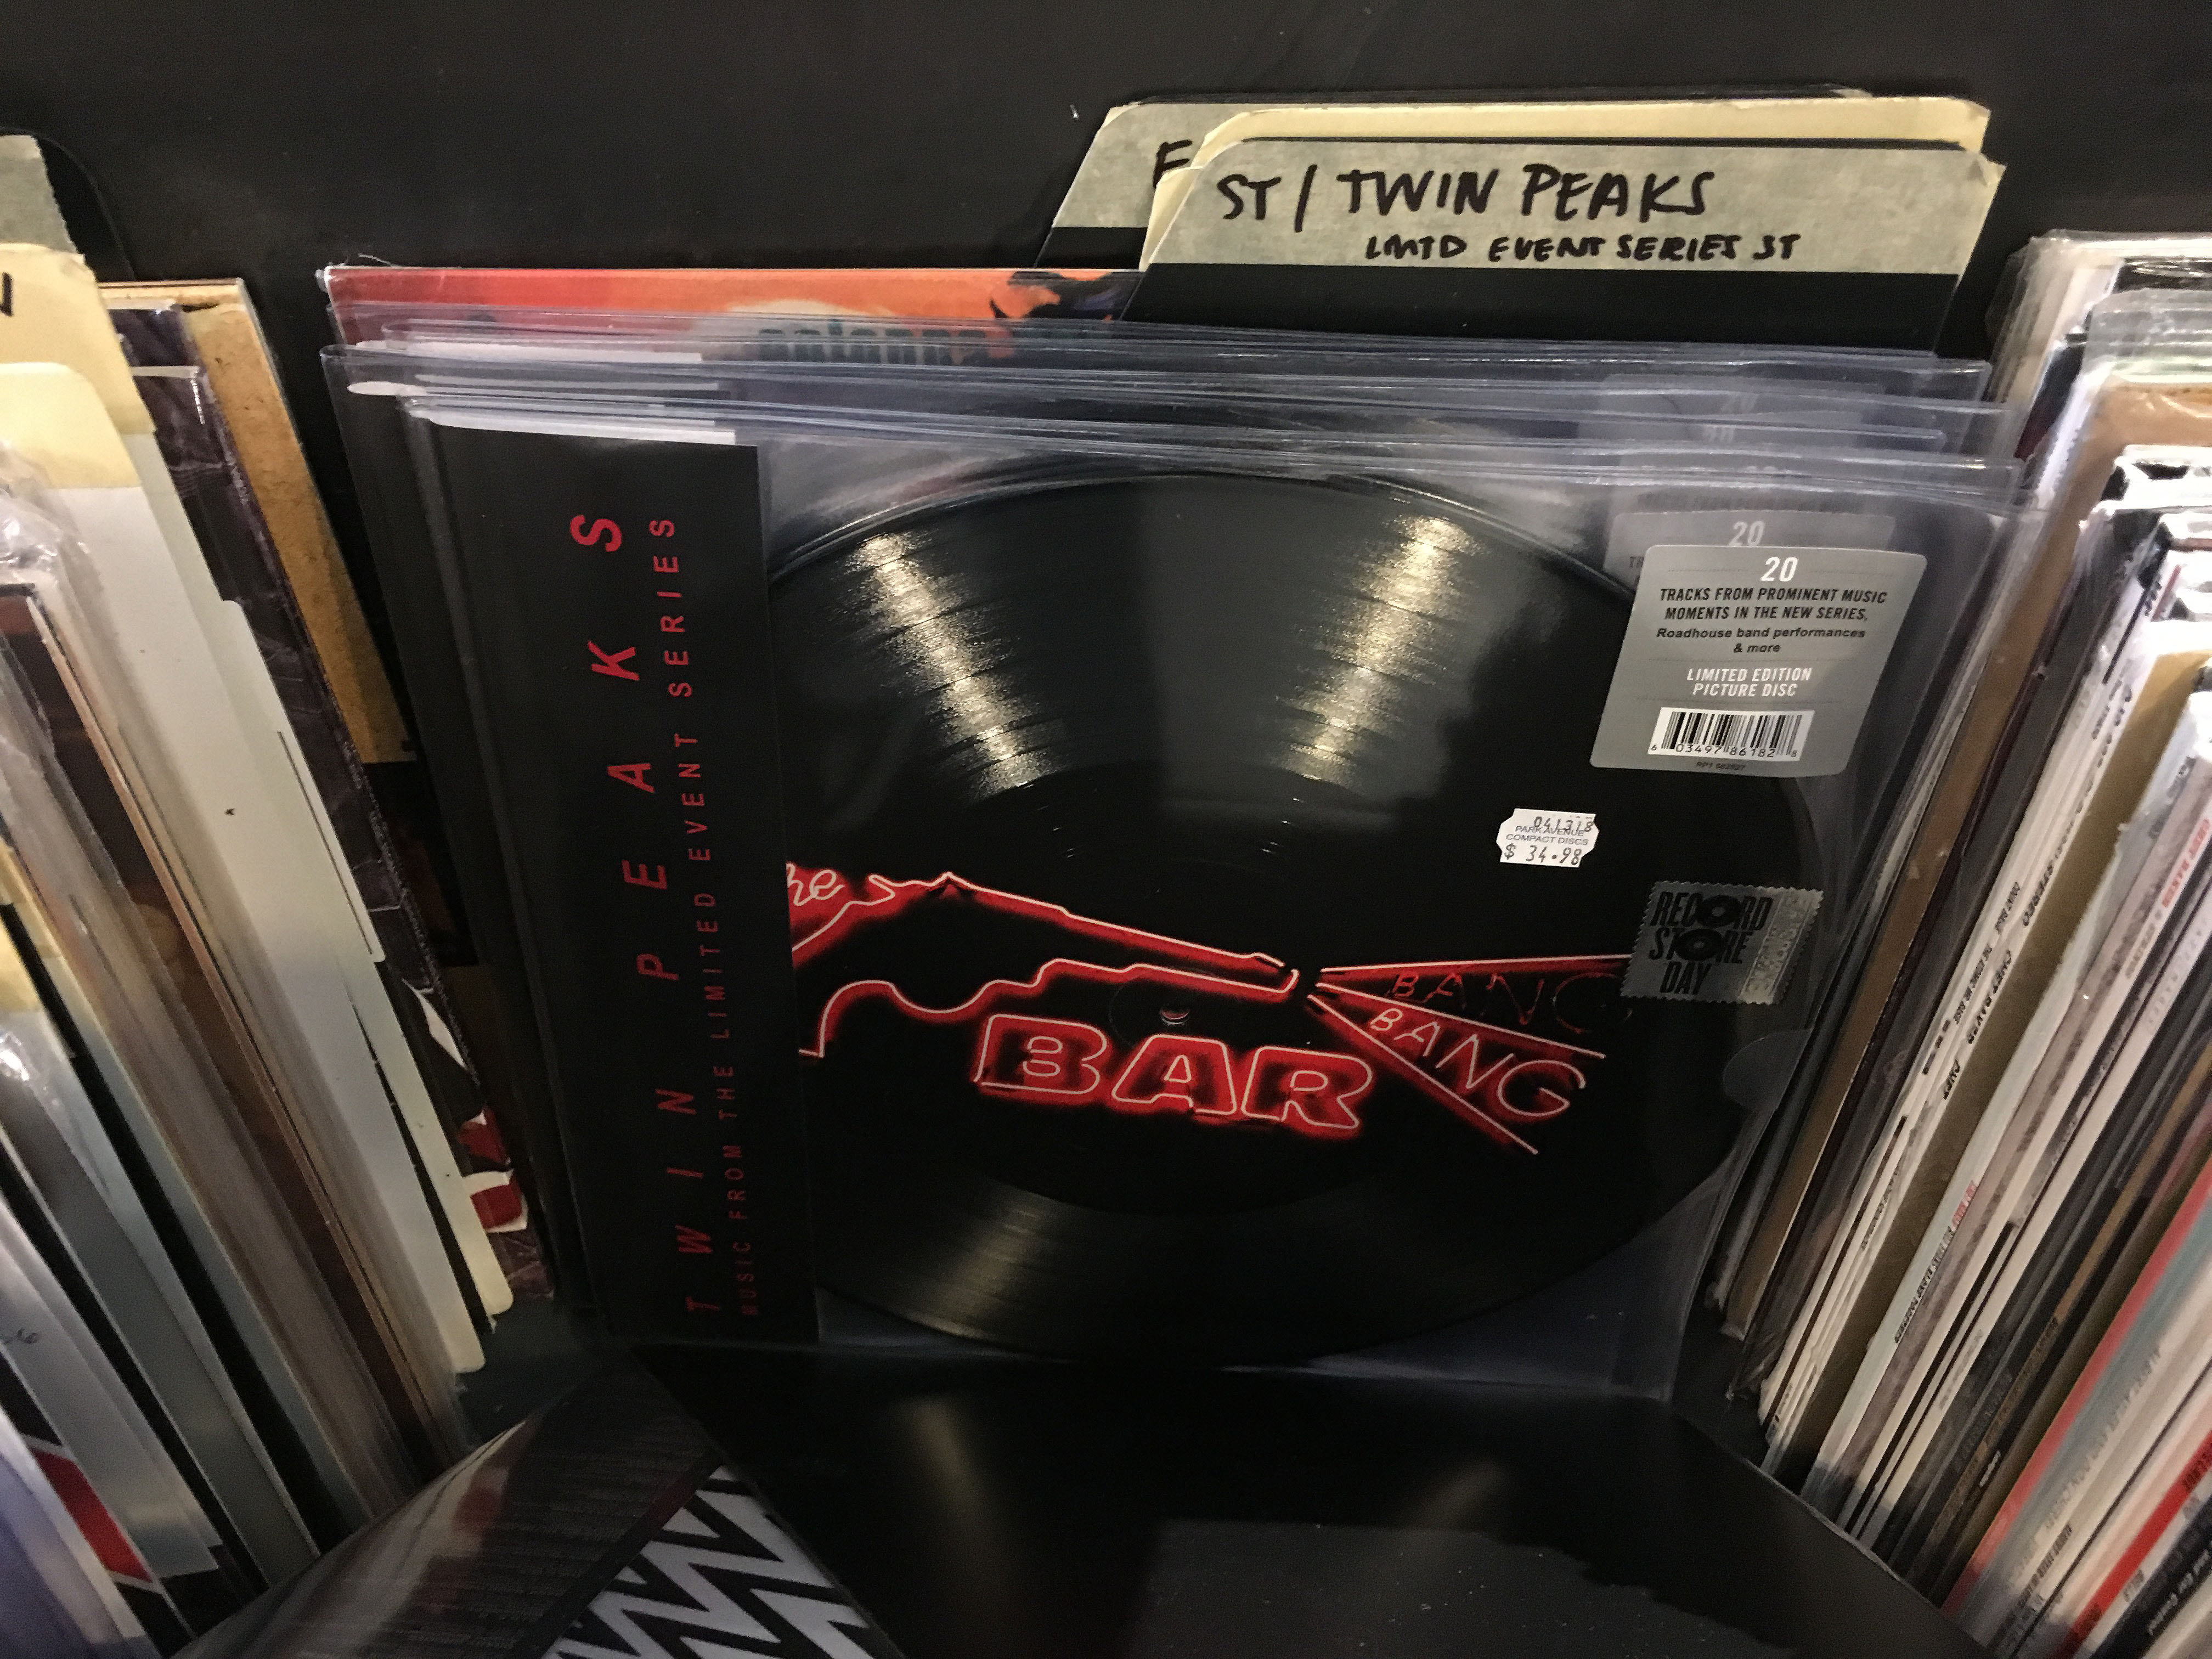 Record Store Day 2018: A Look At The Limited Edition Twin Peaks Soundtrack